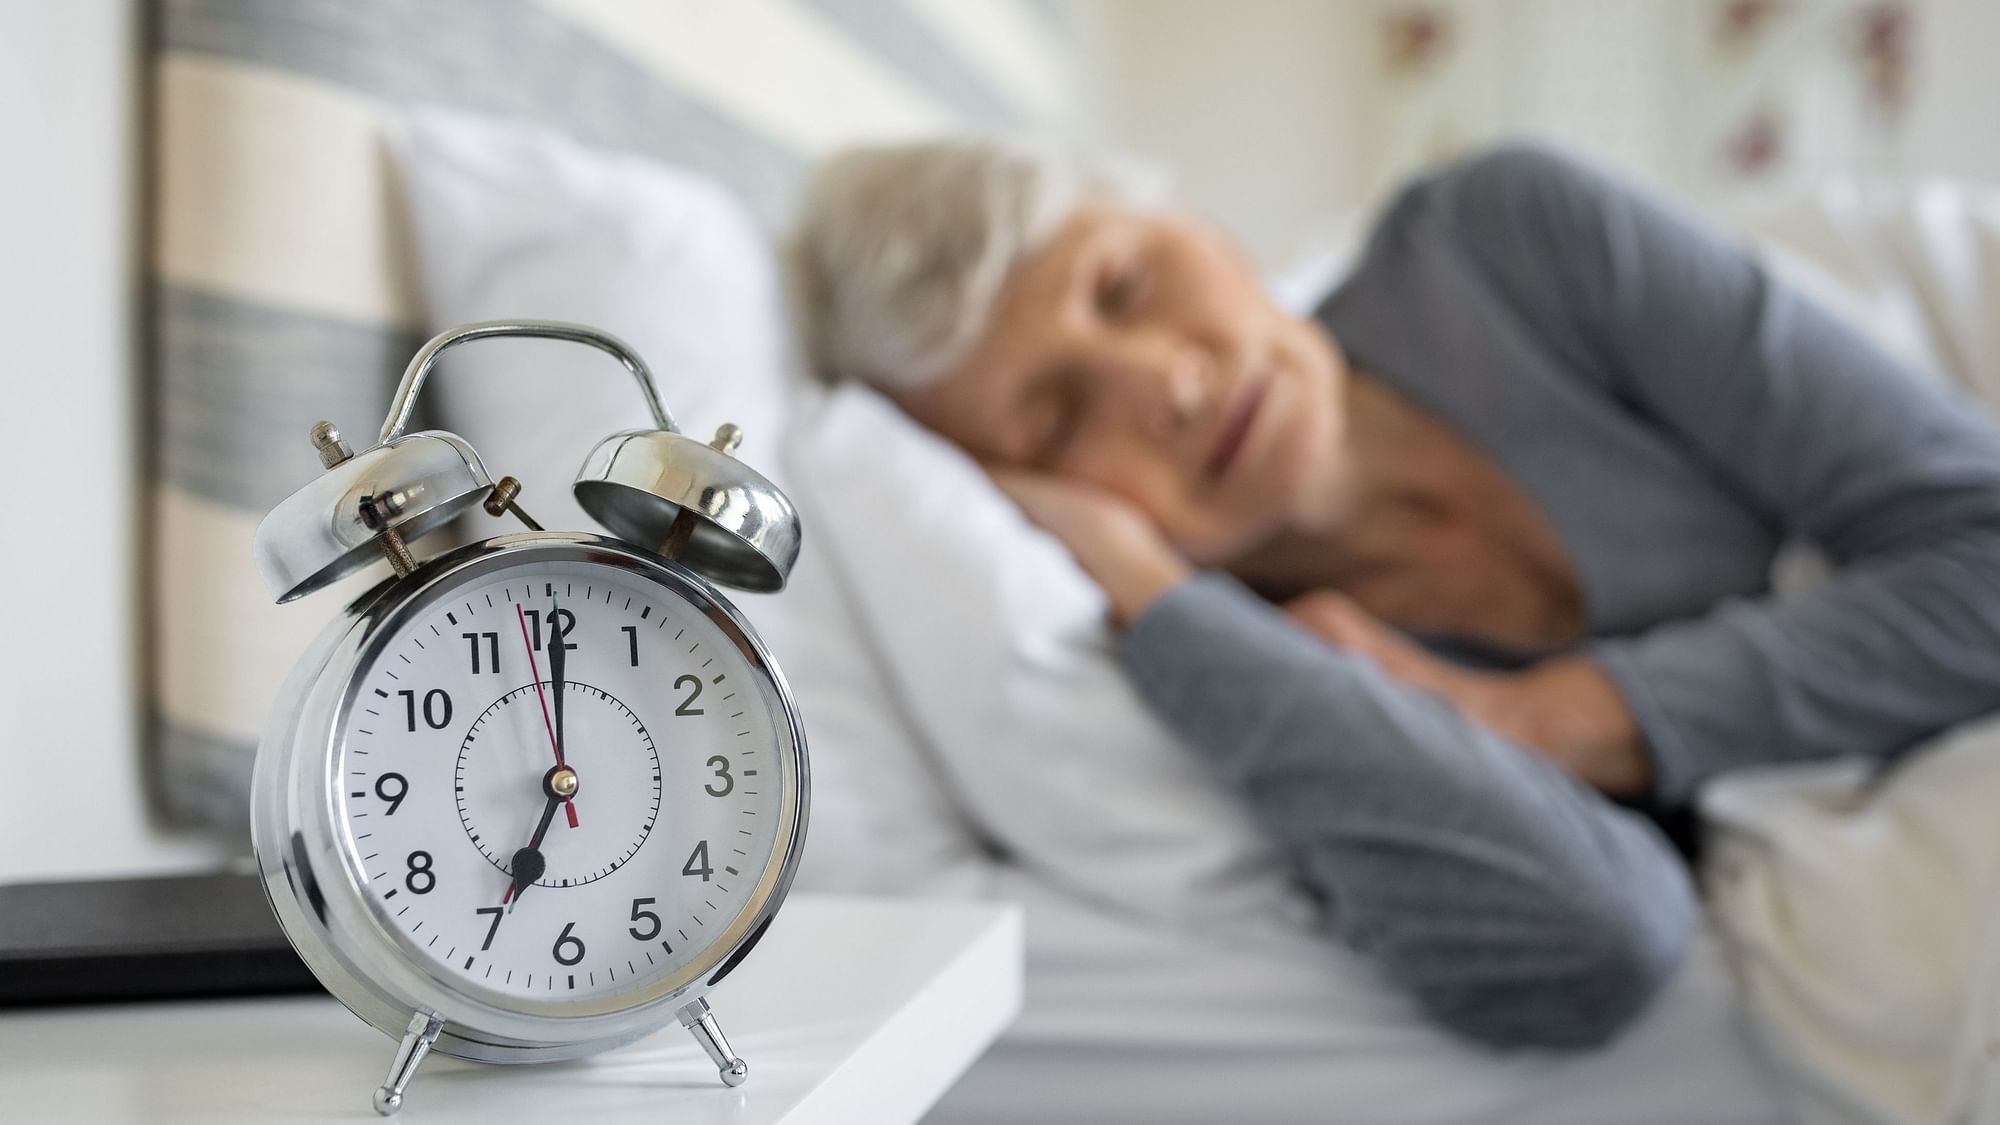 Sleeping for more than 9 hours per night linked to decline in memory and language skills